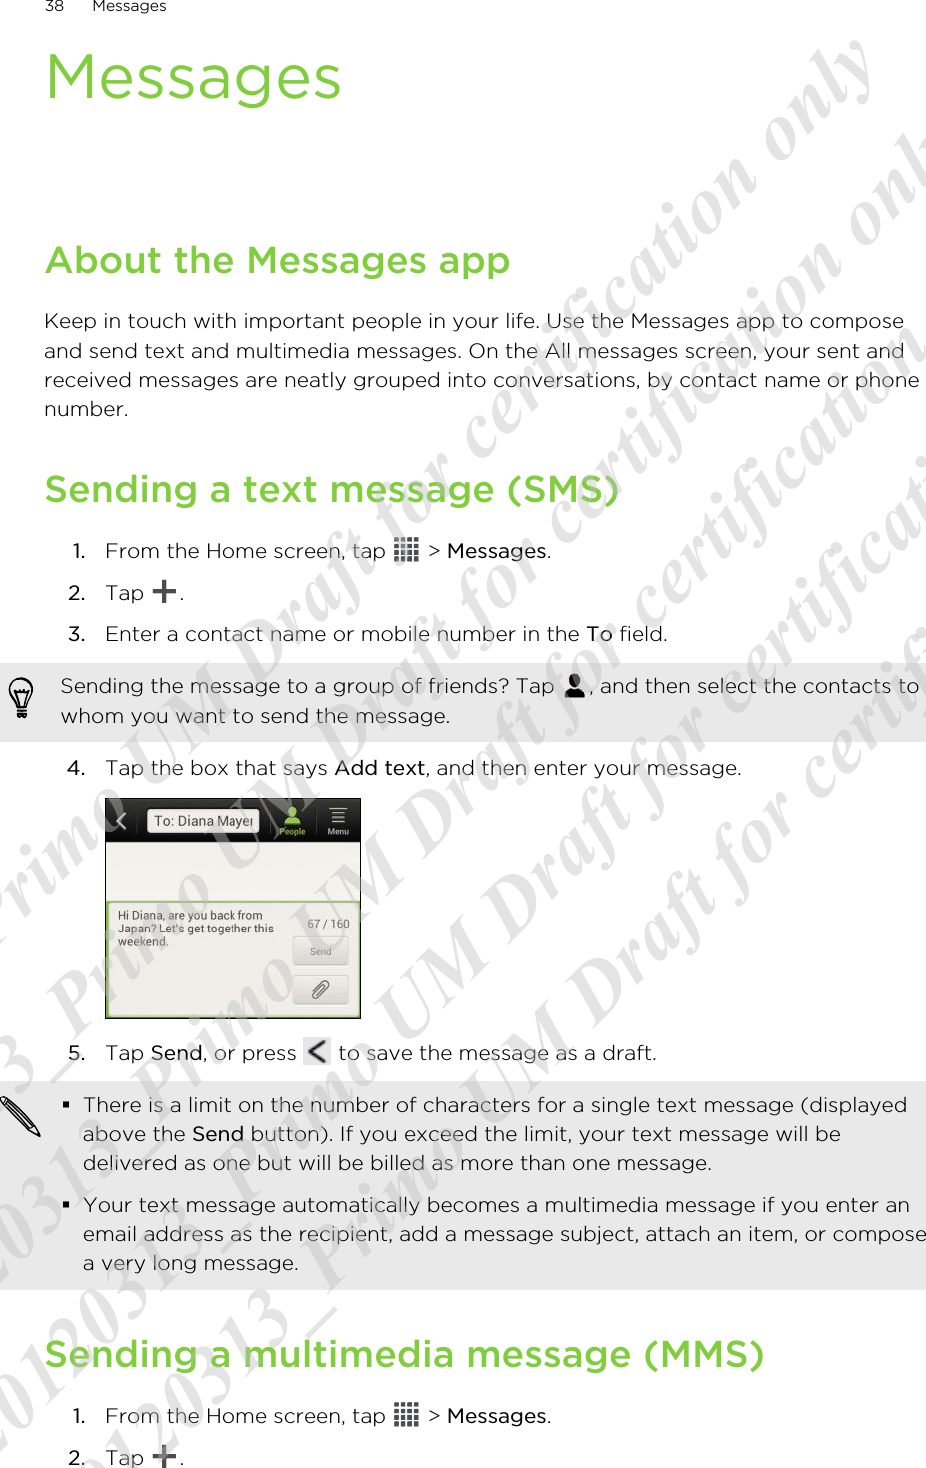 MessagesAbout the Messages appKeep in touch with important people in your life. Use the Messages app to composeand send text and multimedia messages. On the All messages screen, your sent andreceived messages are neatly grouped into conversations, by contact name or phonenumber.Sending a text message (SMS)1. From the Home screen, tap   &gt; Messages.2. Tap  .3. Enter a contact name or mobile number in the To field. Sending the message to a group of friends? Tap  , and then select the contacts towhom you want to send the message.4. Tap the box that says Add text, and then enter your message. 5. Tap Send, or press   to save the message as a draft. §There is a limit on the number of characters for a single text message (displayedabove the Send button). If you exceed the limit, your text message will bedelivered as one but will be billed as more than one message.§Your text message automatically becomes a multimedia message if you enter anemail address as the recipient, add a message subject, attach an item, or composea very long message.Sending a multimedia message (MMS)1. From the Home screen, tap   &gt; Messages.2. Tap  .38 Messages20120313_Primo UM Draft for certification only 20120313_Primo UM Draft for certification only 20120313_Primo UM Draft for certification only 20120313_Primo UM Draft for certification only 20120313_Primo UM Draft for certification only